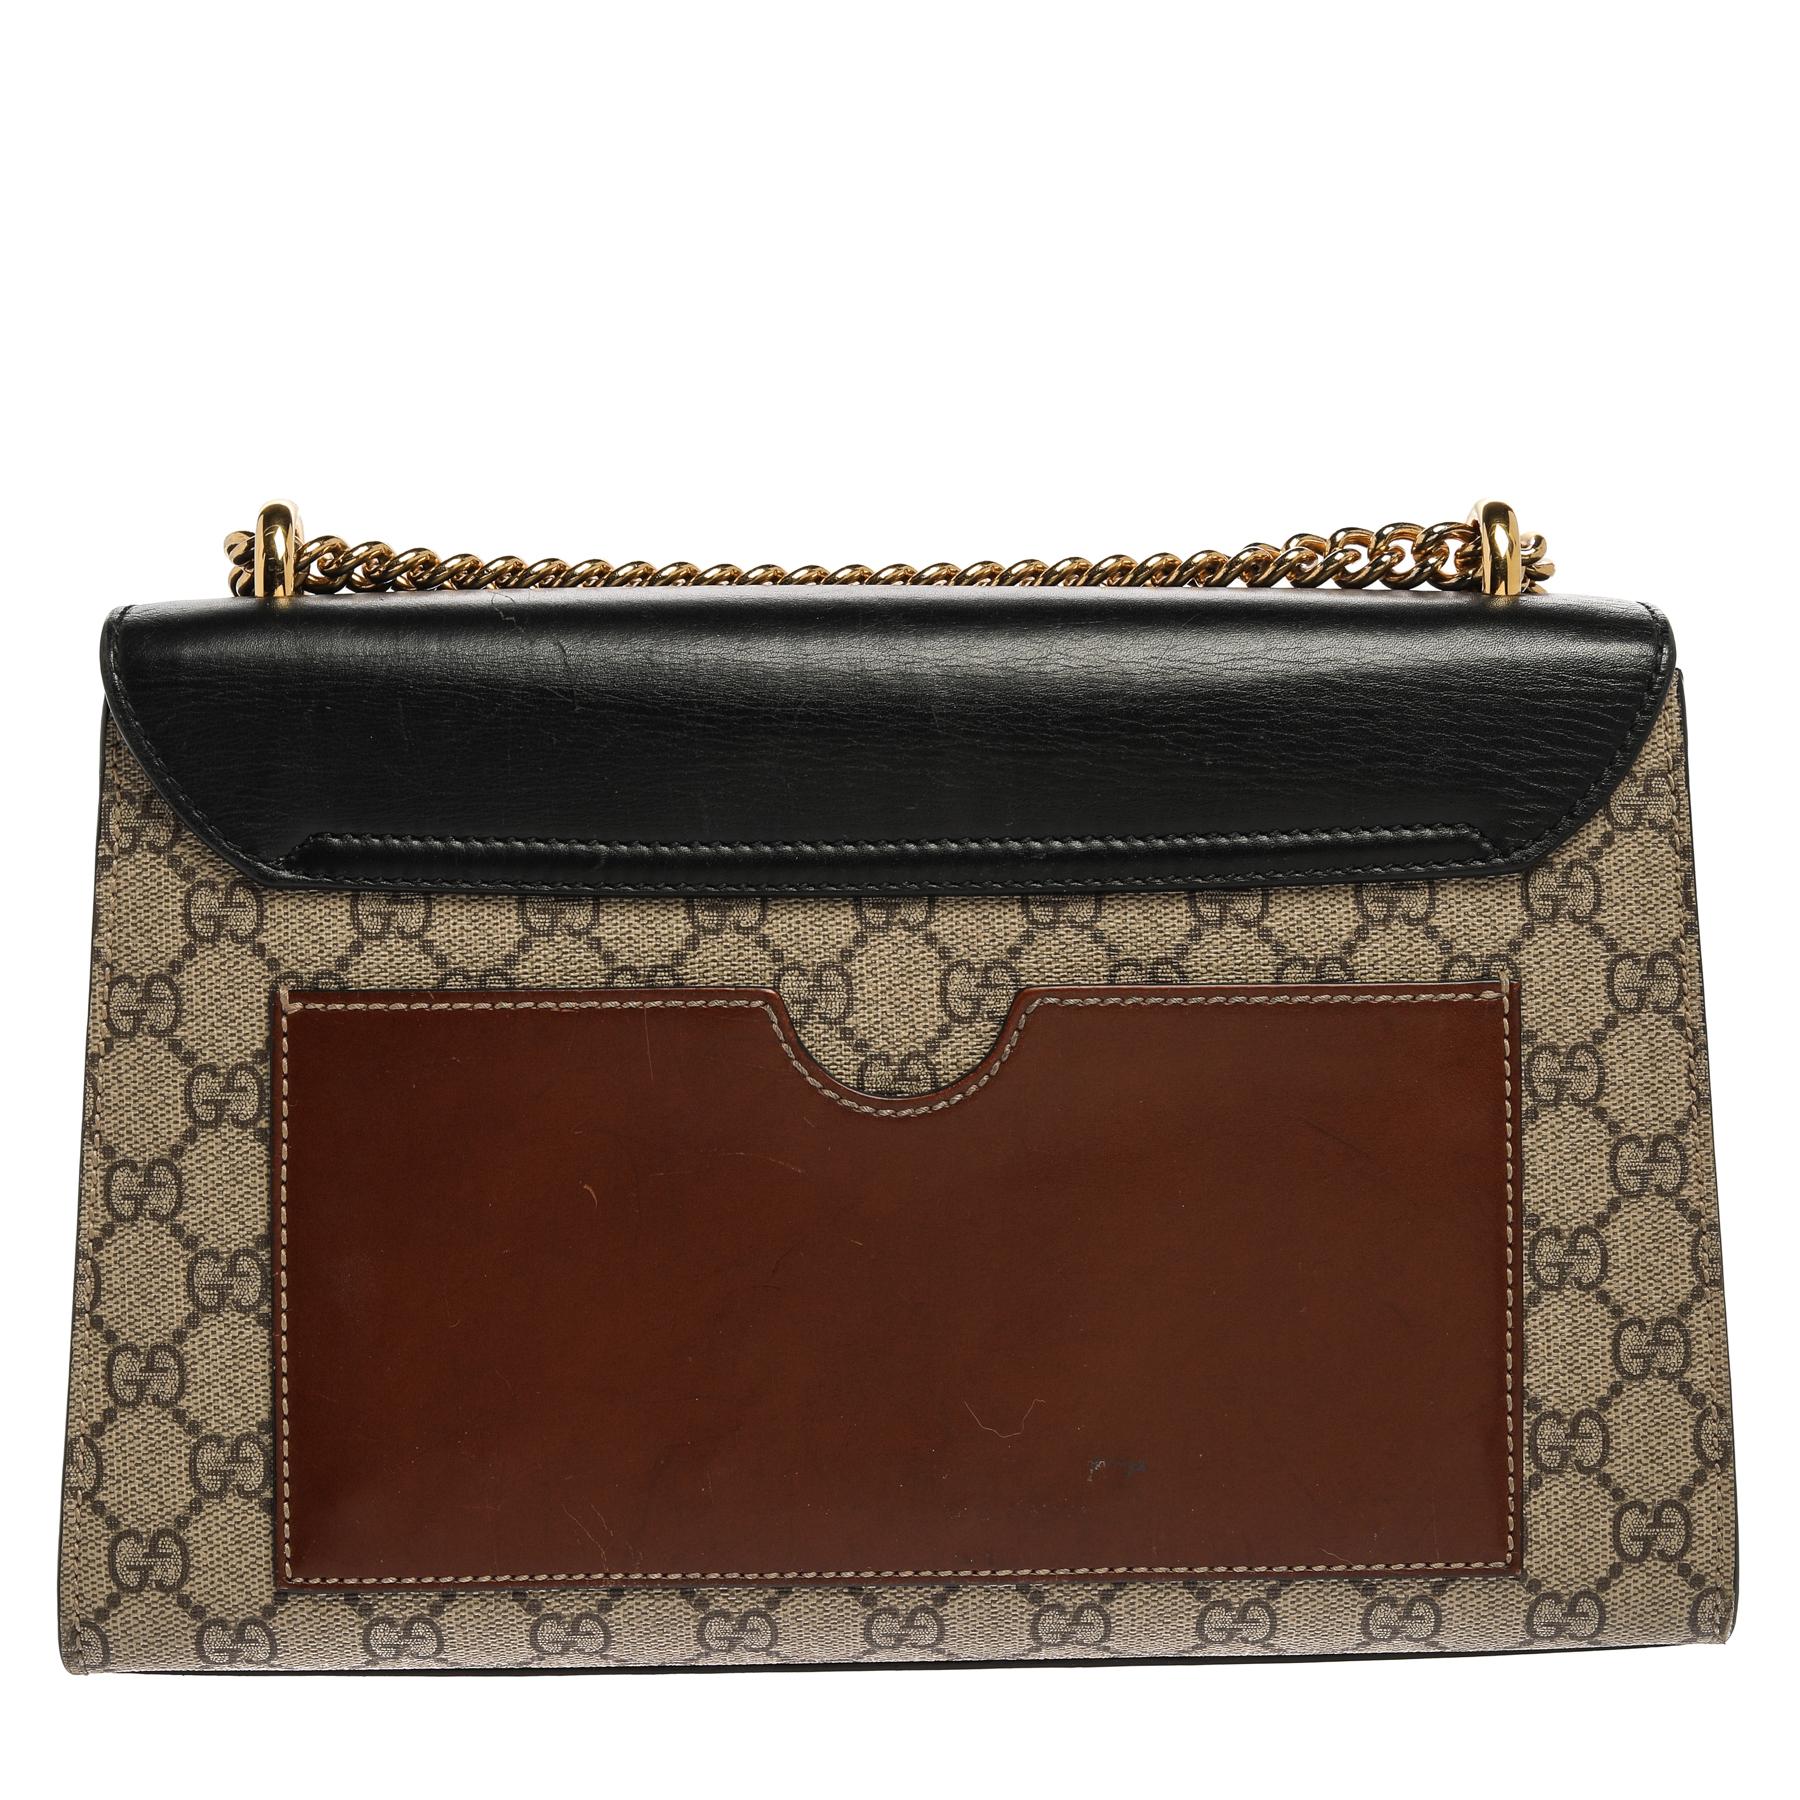 Made with GG Supreme canvas and premium quality leather, this Gucci Padlock can be used both as a crossbody and a shoulder bag. It is held by a sleek gold-tone chain and adorned with a gold-tone key-lock closure on the front. Carry this beauty for